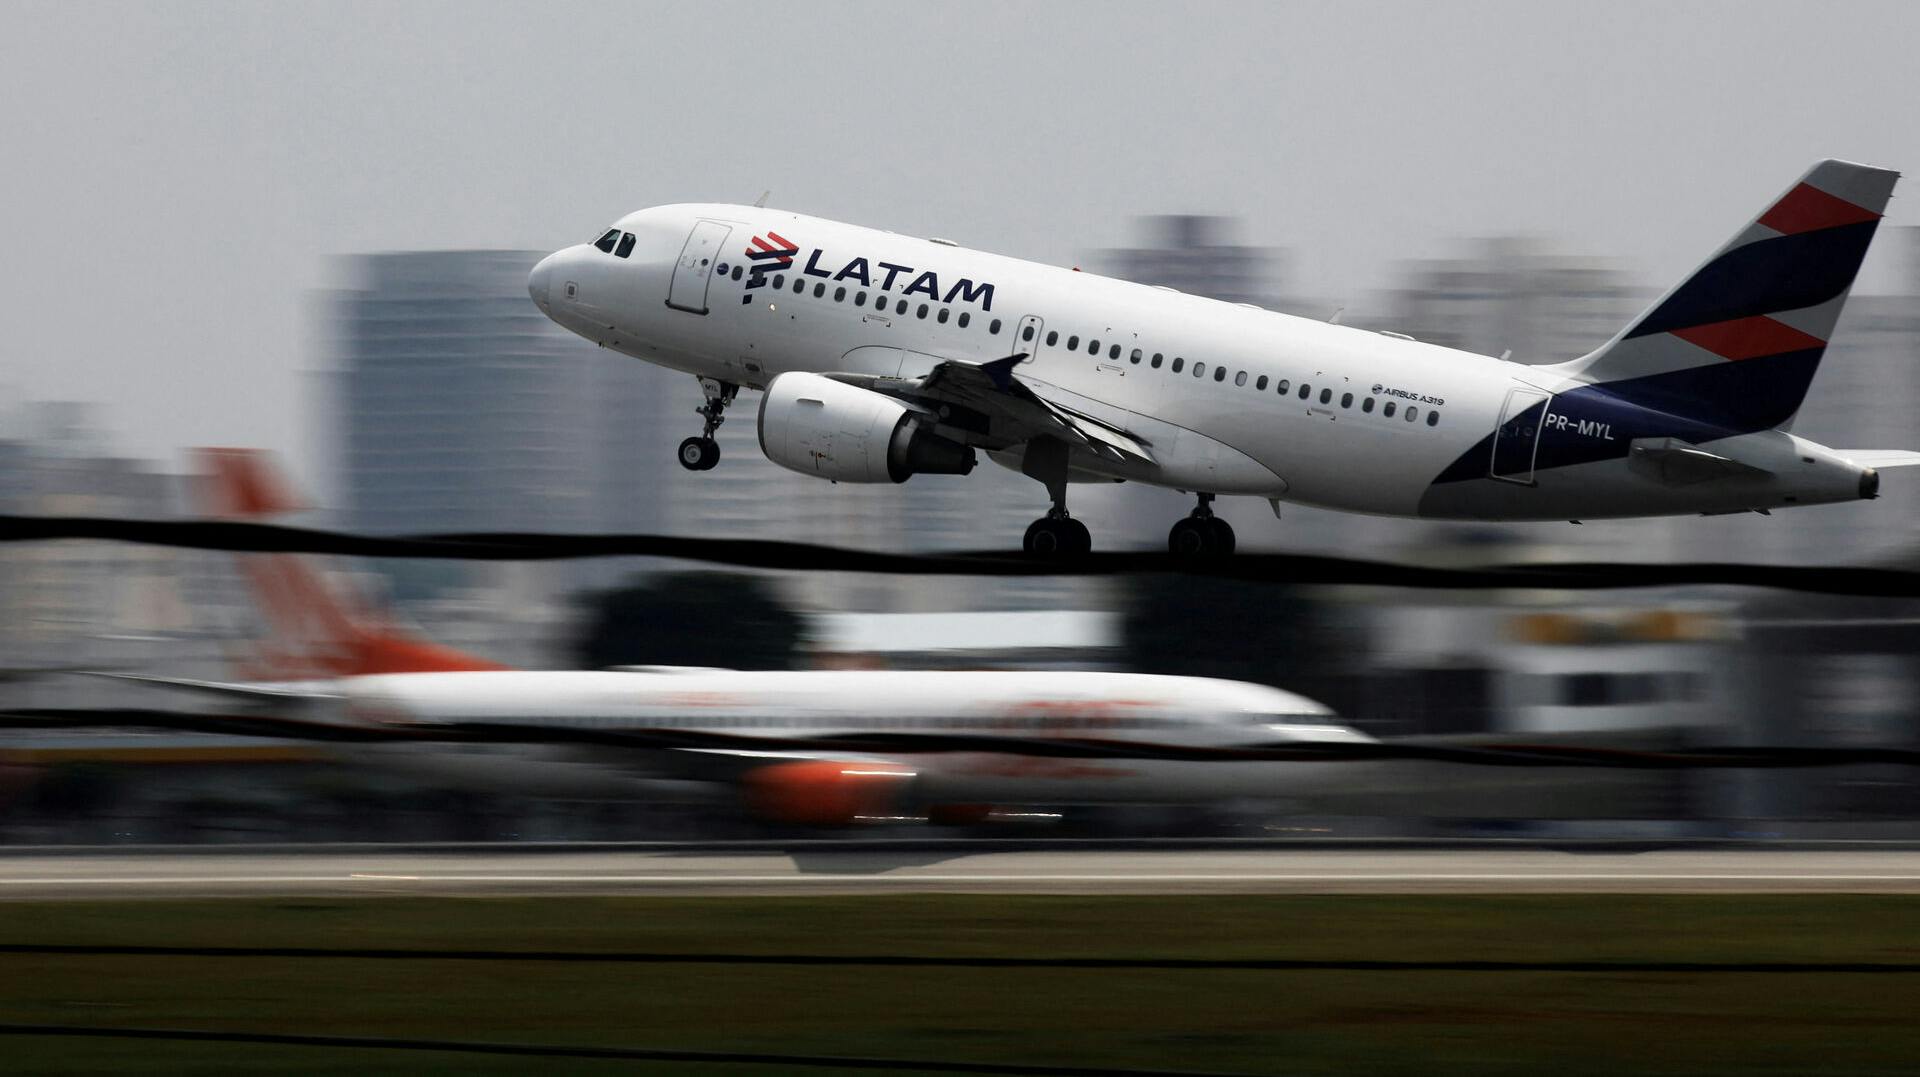 FILE PHOTO: A LATAM Airlines Brasil Airbus A319-100 plane takes off from Congonhas airport in Sao Paulo, Brazil December 19, 2017. REUTERS/Nacho Doce/File Photo